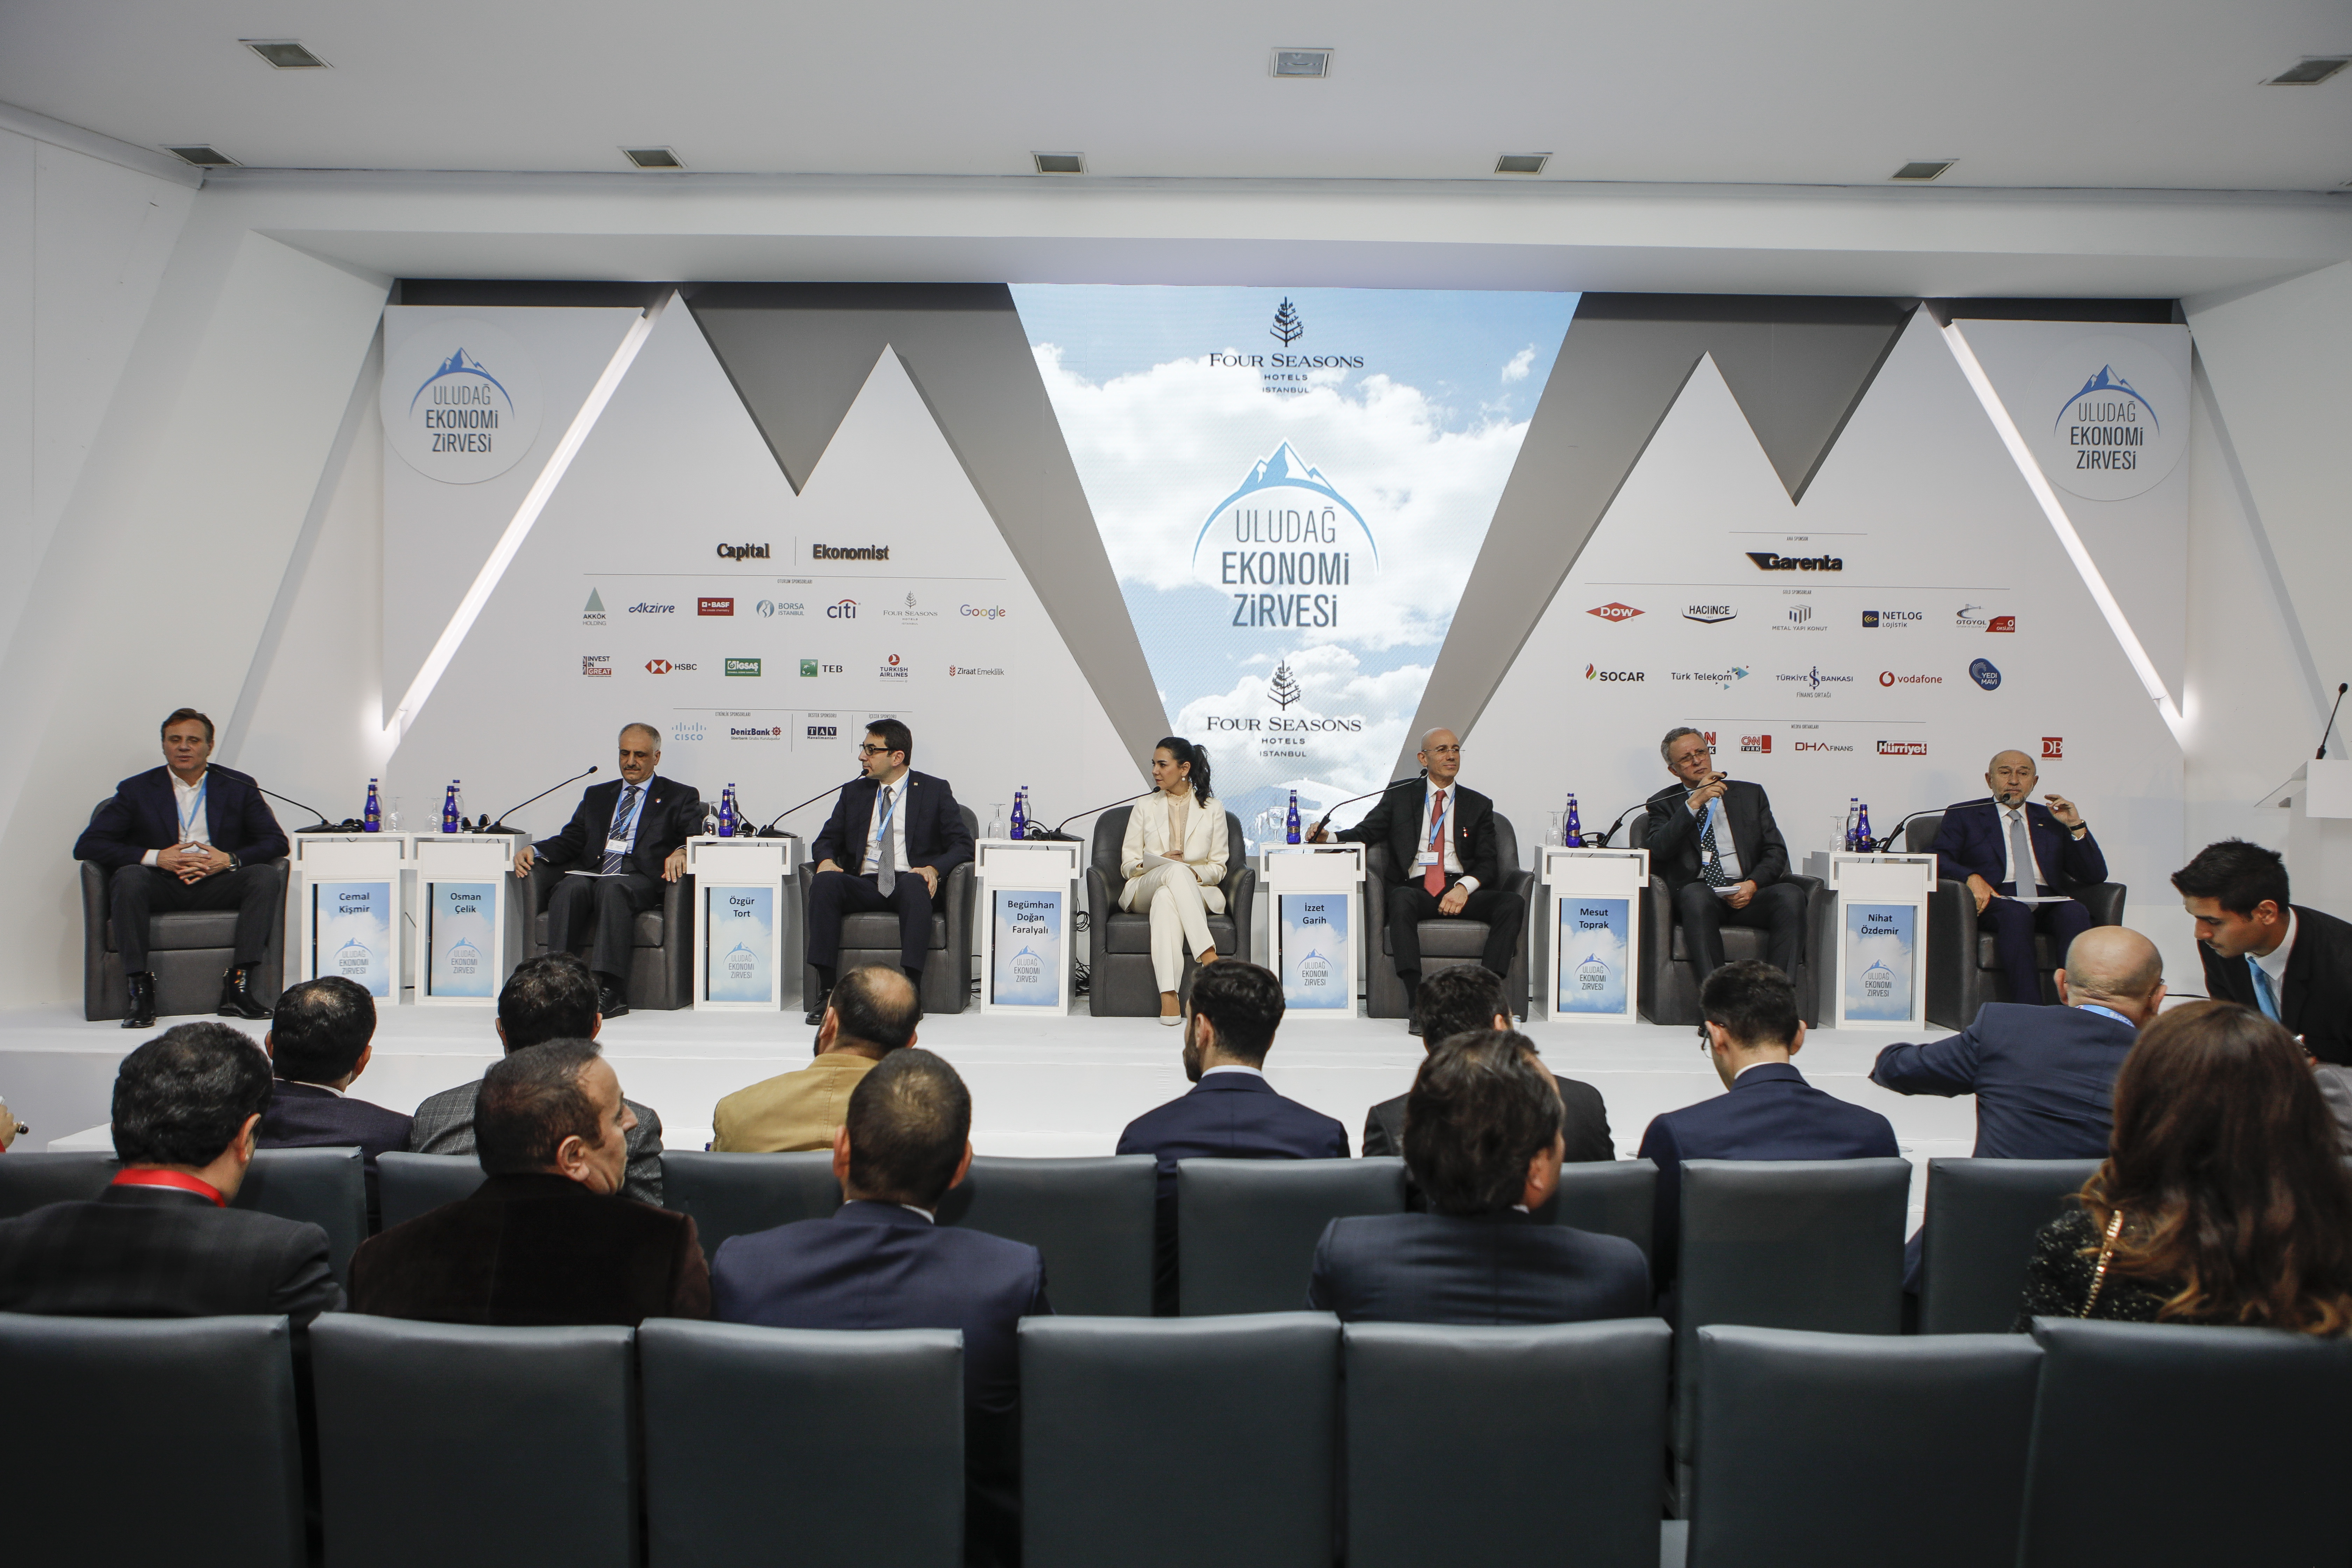 İzzet Garih, Chairman of the Board of Directors of Alarko Holding A.Ş. Attended the 7th Uludağ Economy Summit